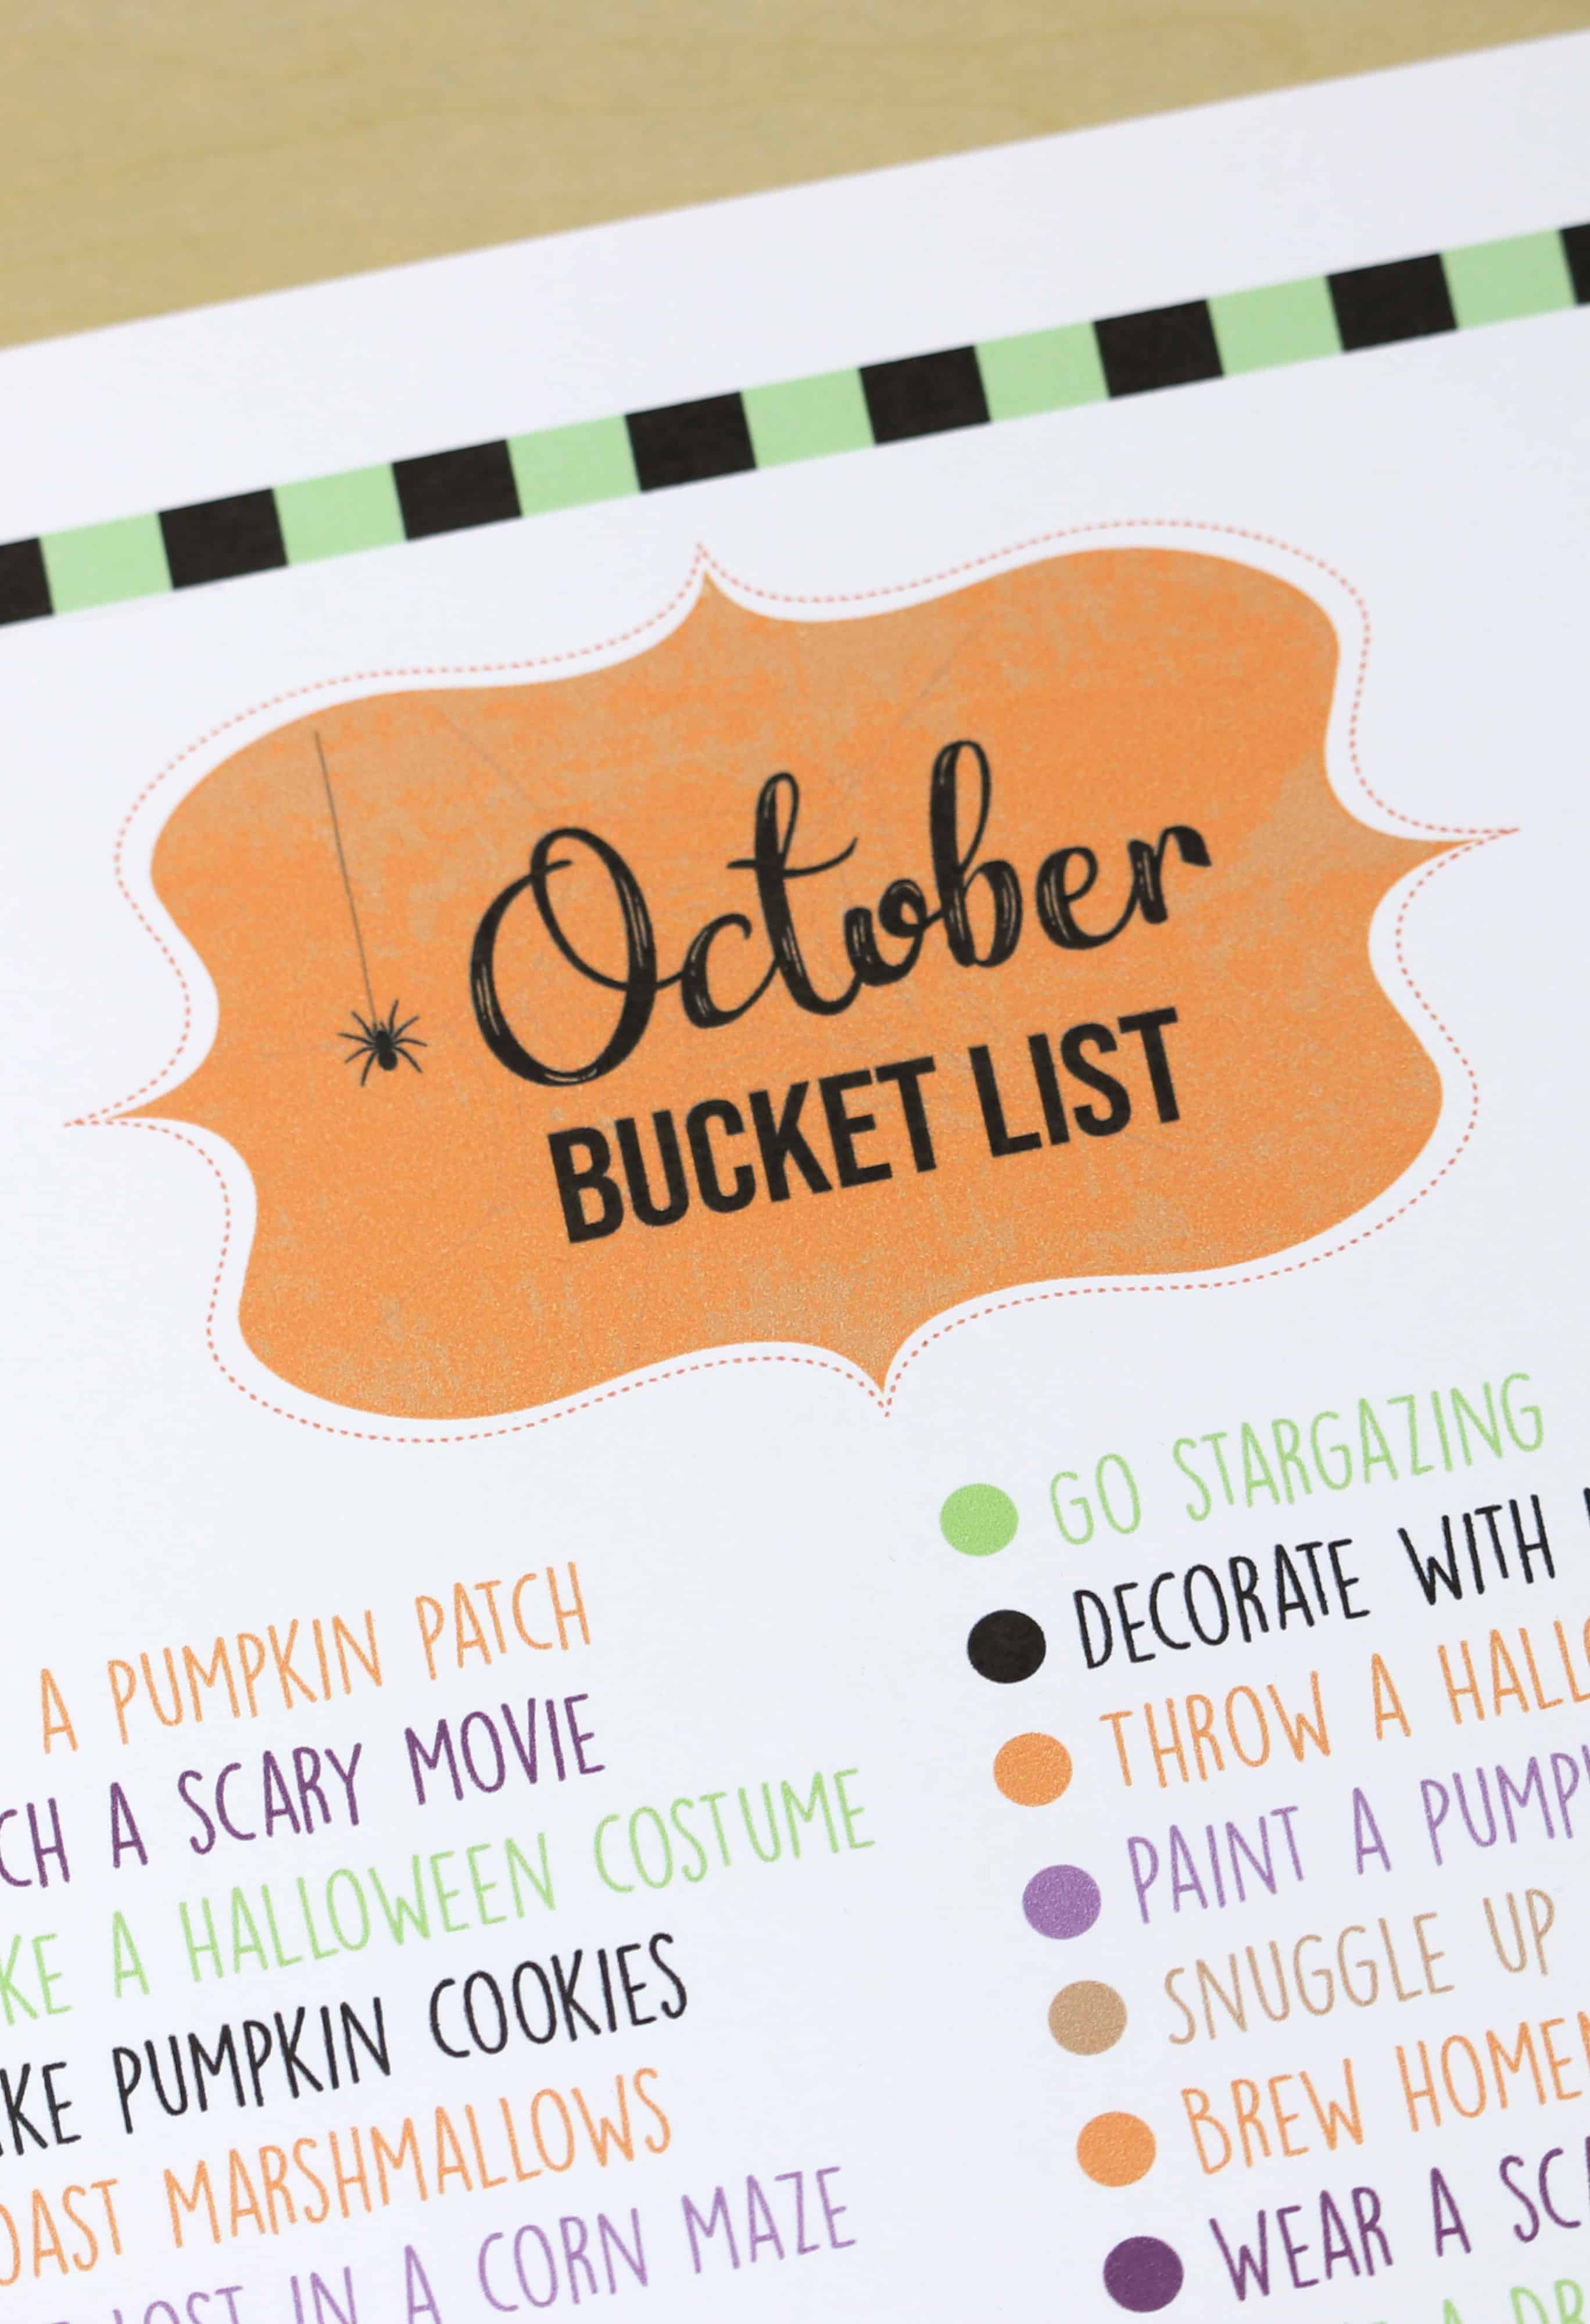 FREE Printable Bucket List to Max Your October